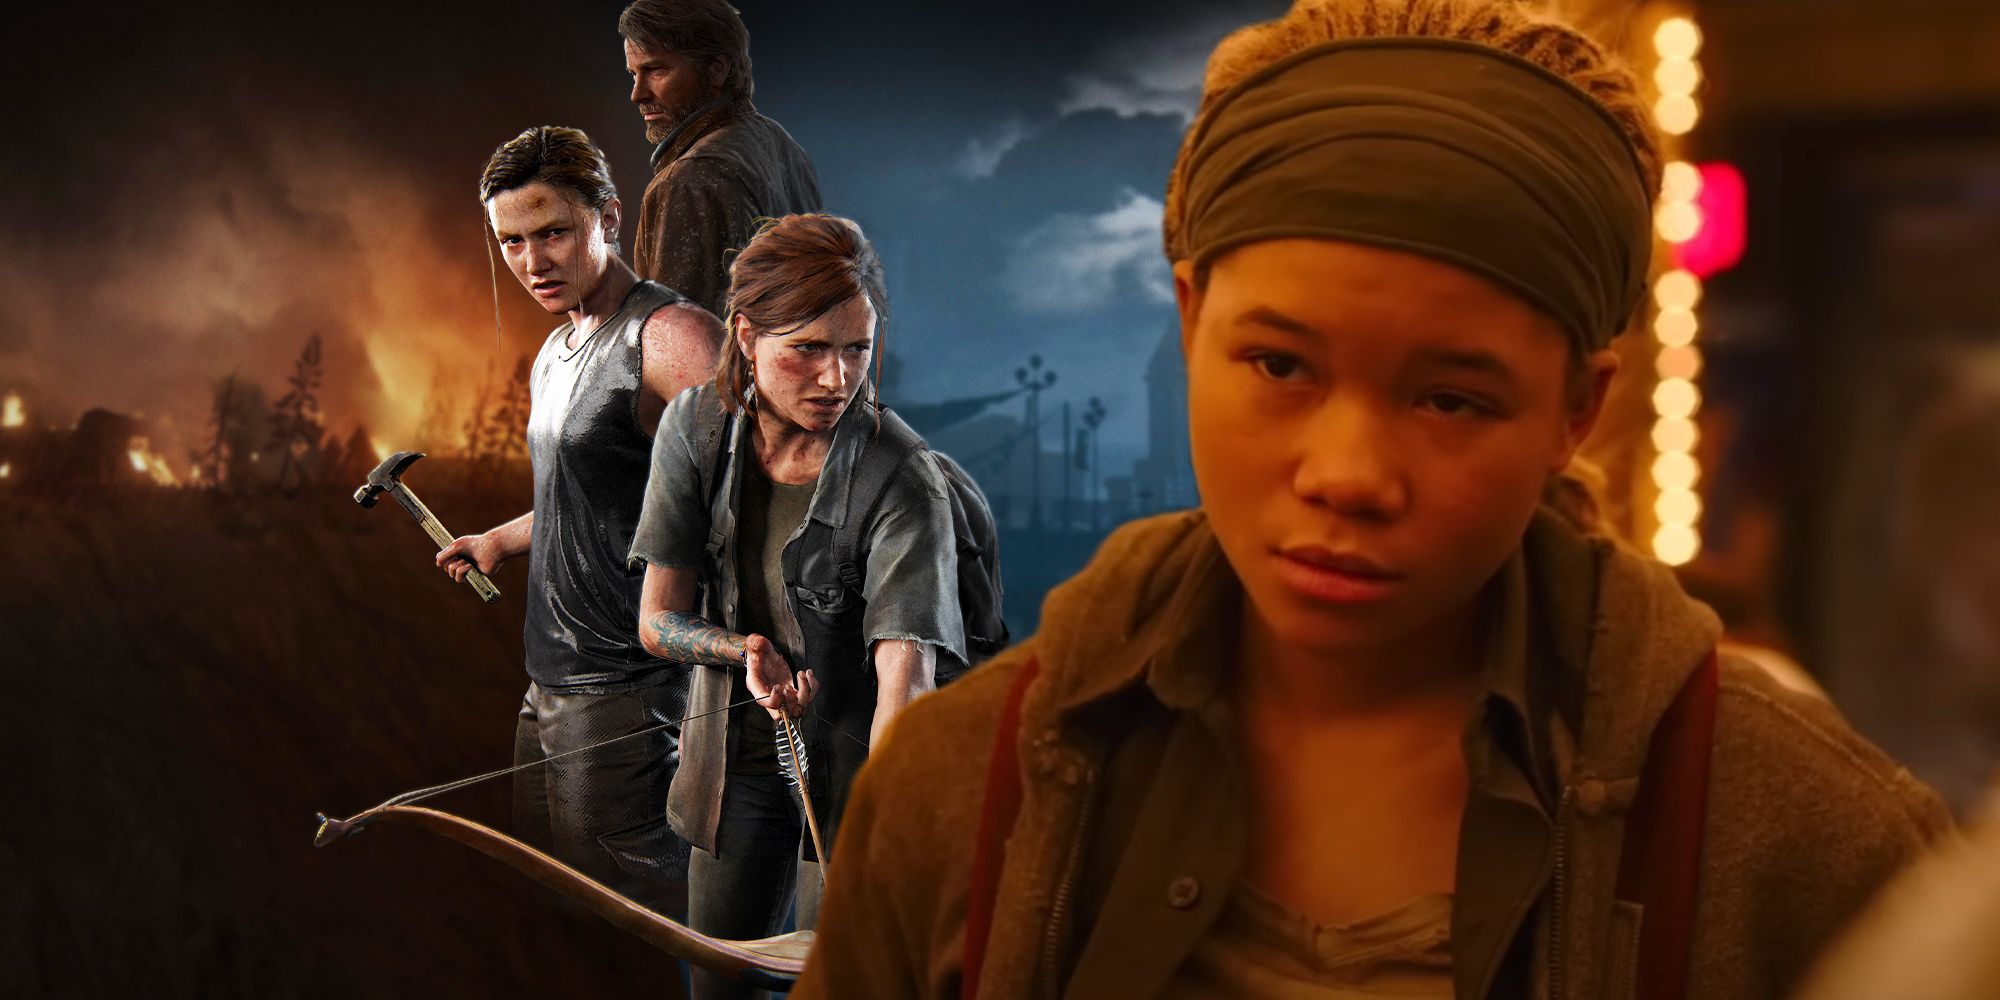 Storm Reid as Riley looking sad in HBO's Last of Us and the poster for The Last of Us Part II